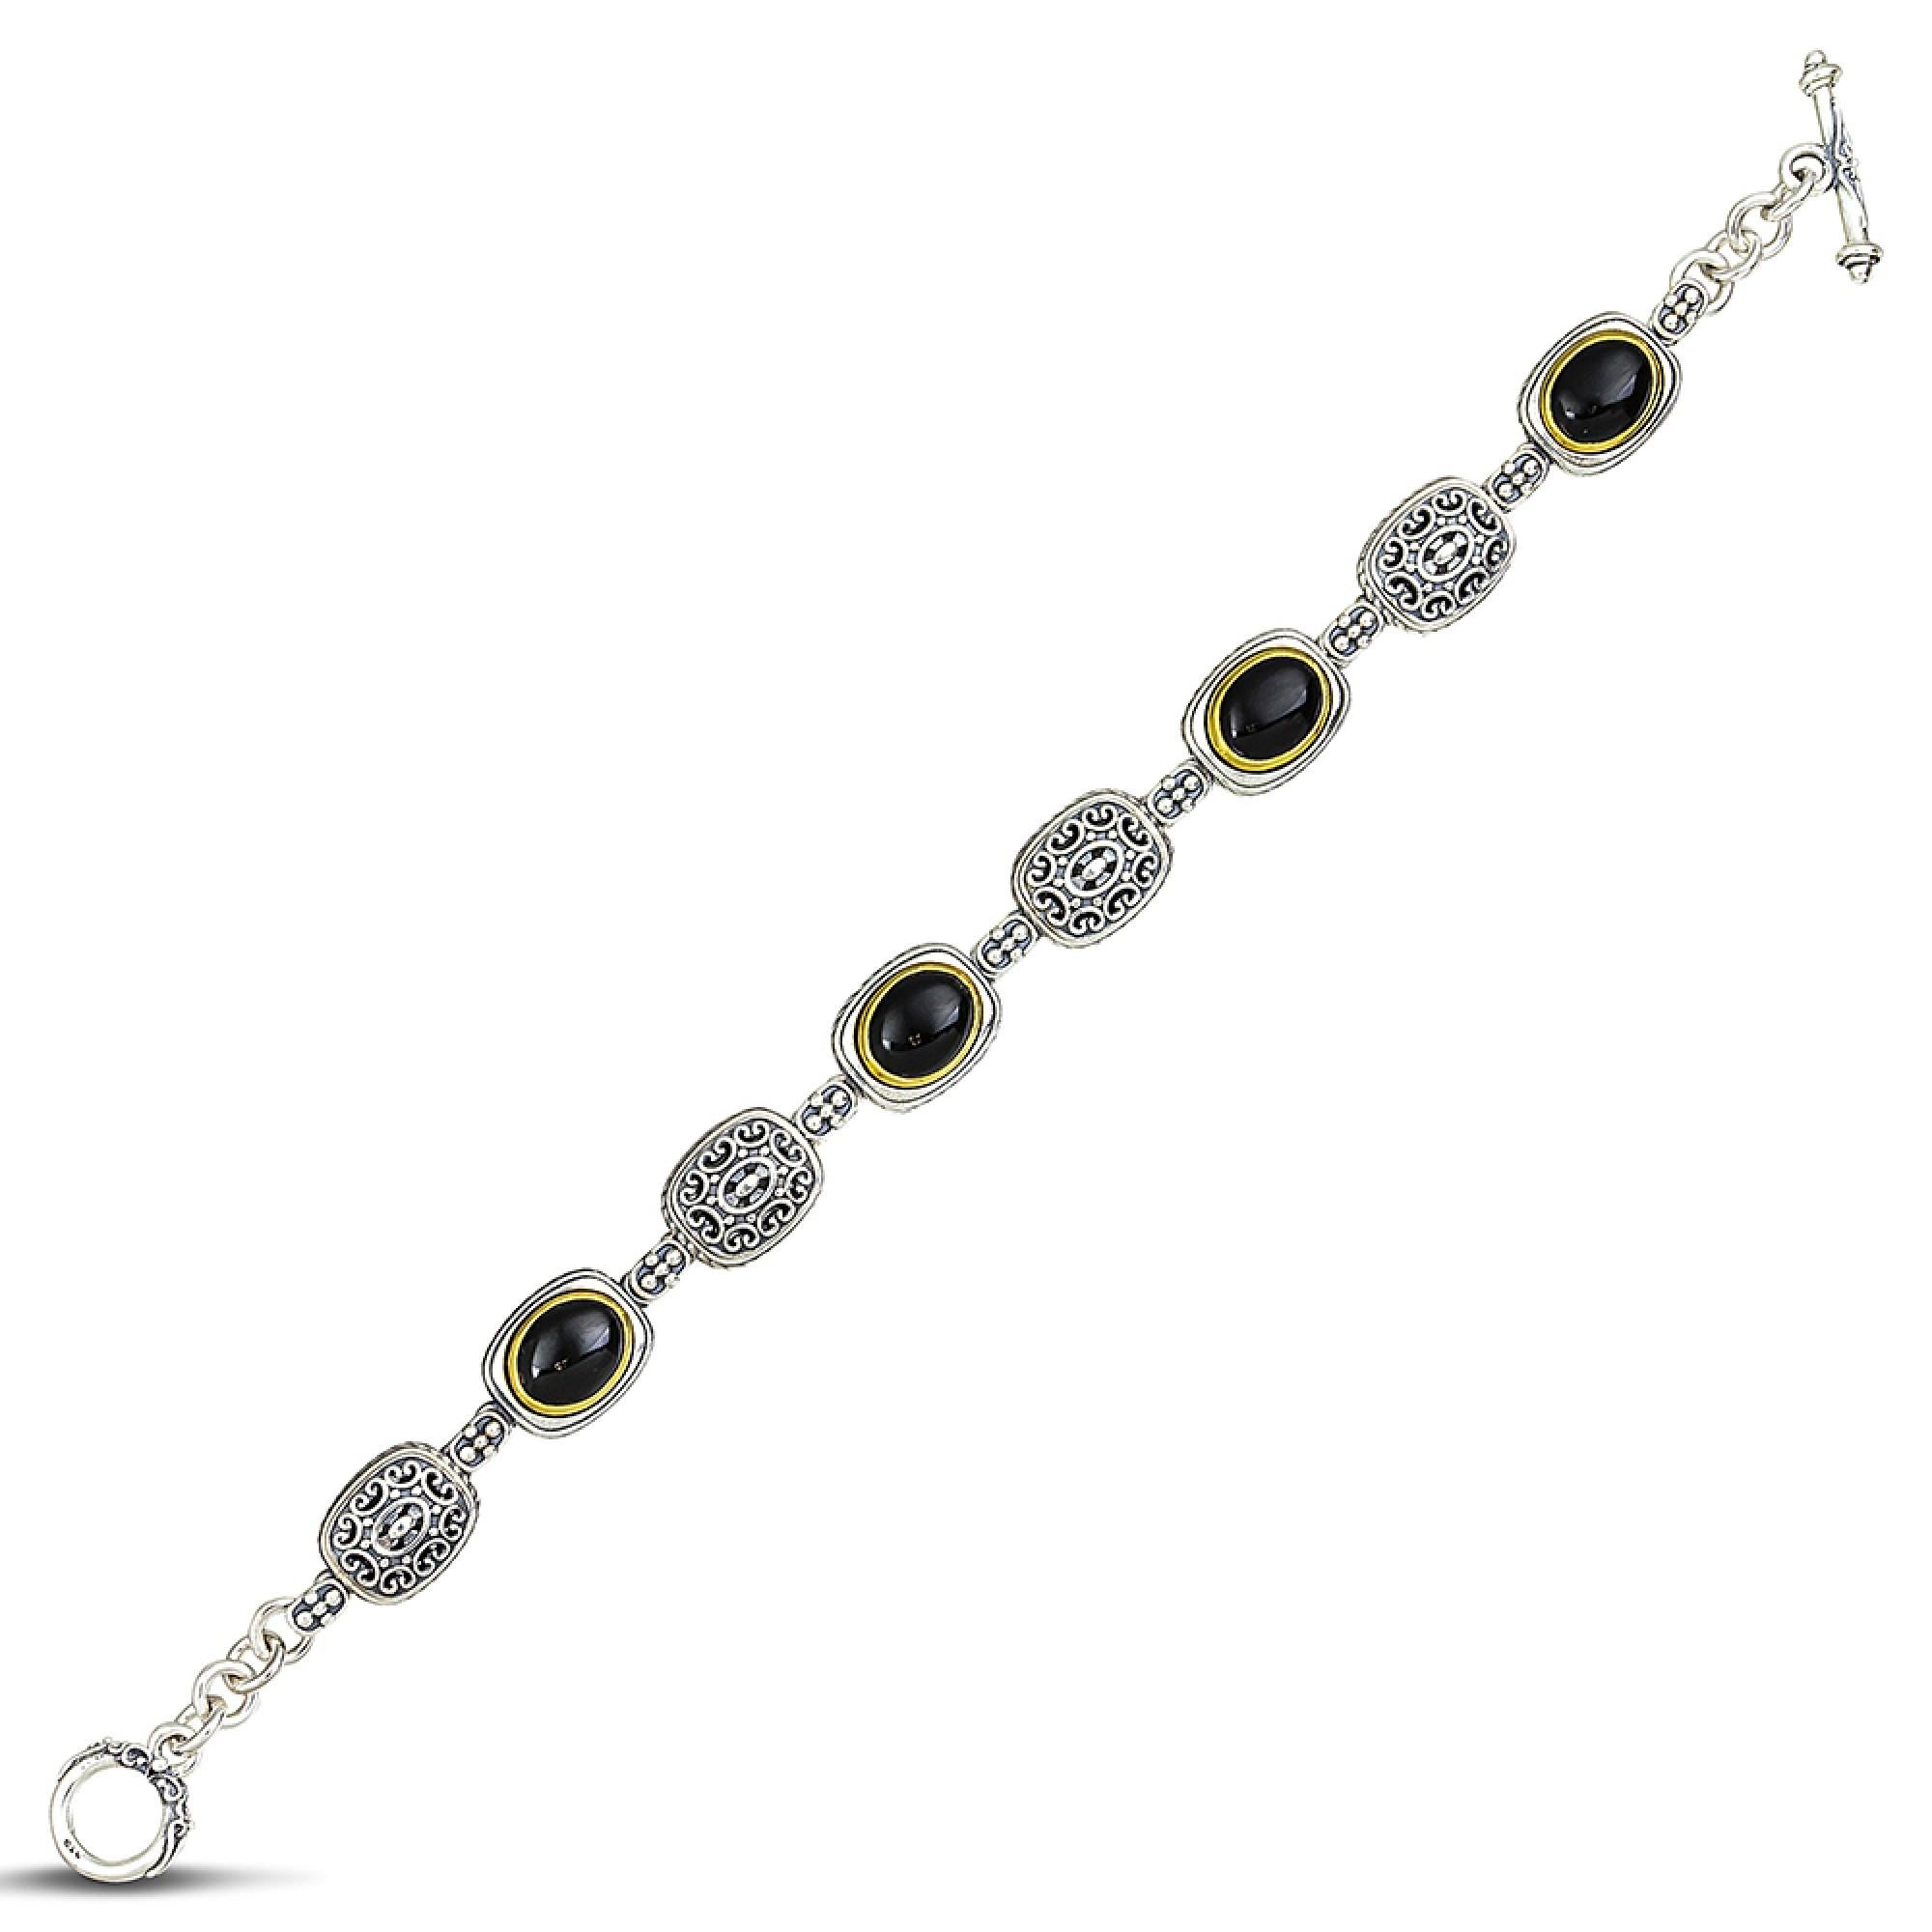 A unique chain bracelet with oval black onyx gemstones in gold-plated bezels comes to complete the men's collection Anax.

A refined bracelet that adds style to your look, made with embossed details.